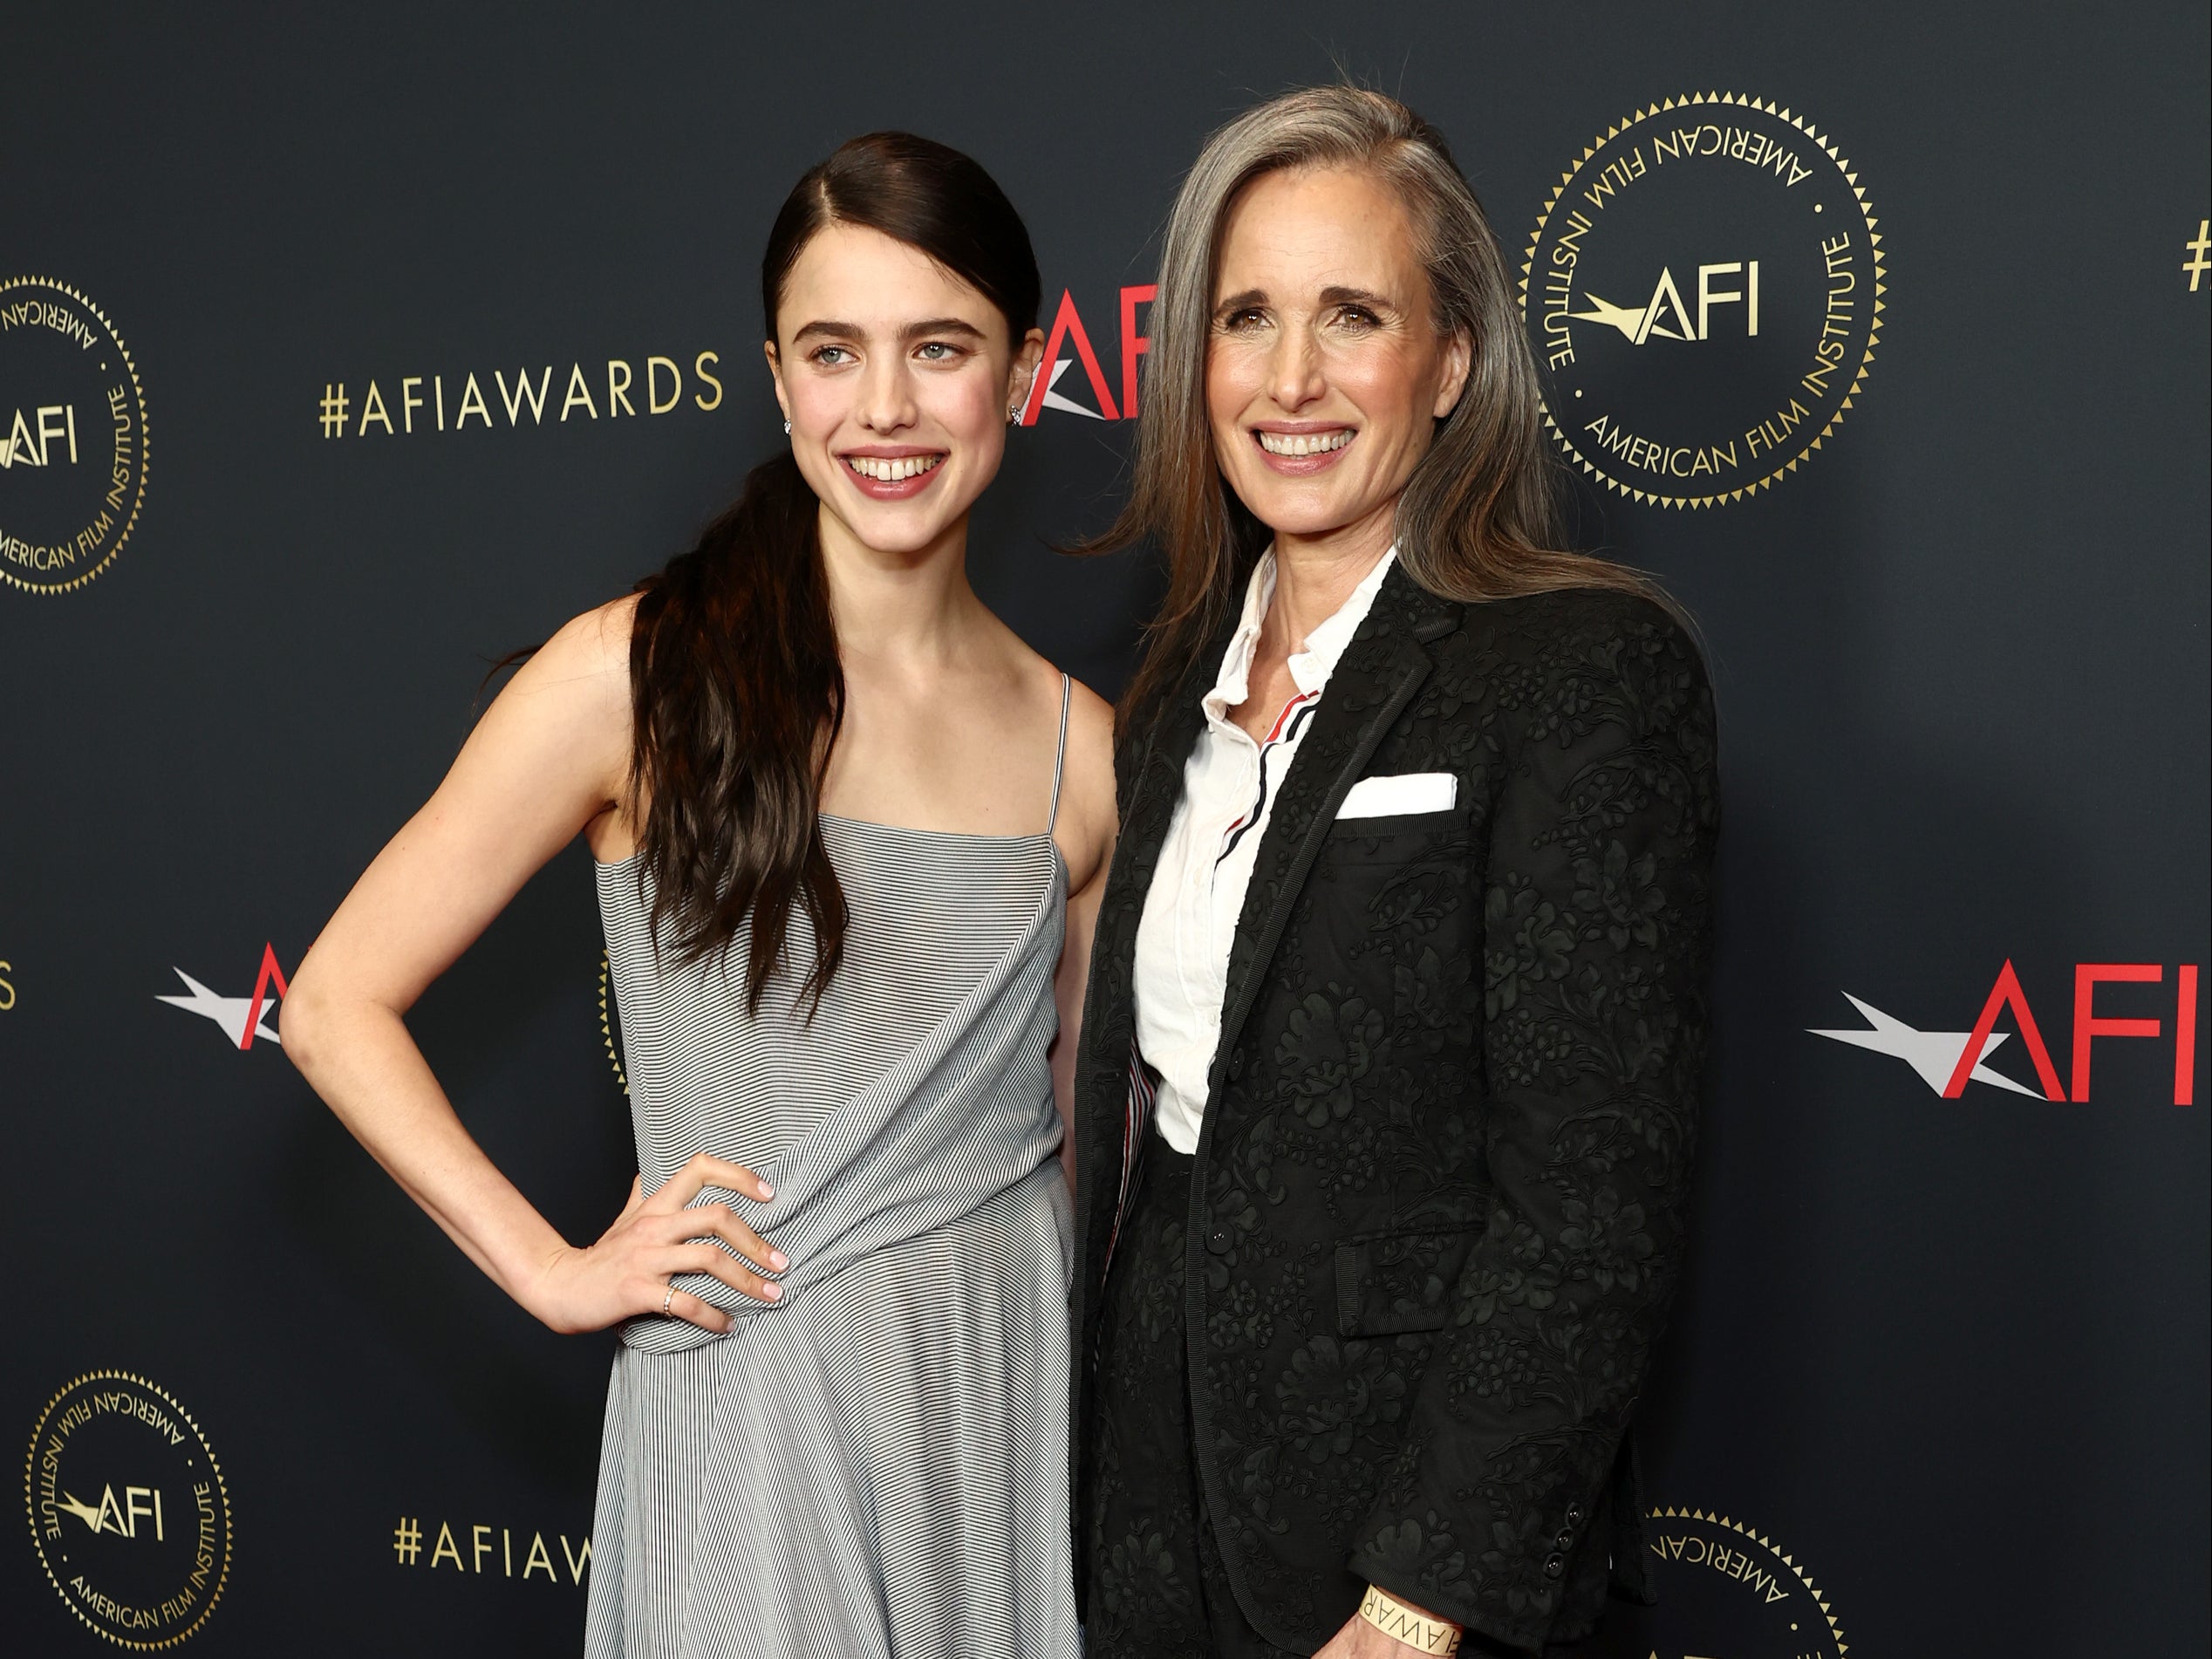 Andiew MacDowell and her daughter, Margaret Qualley, star in Netflix’s Maid together